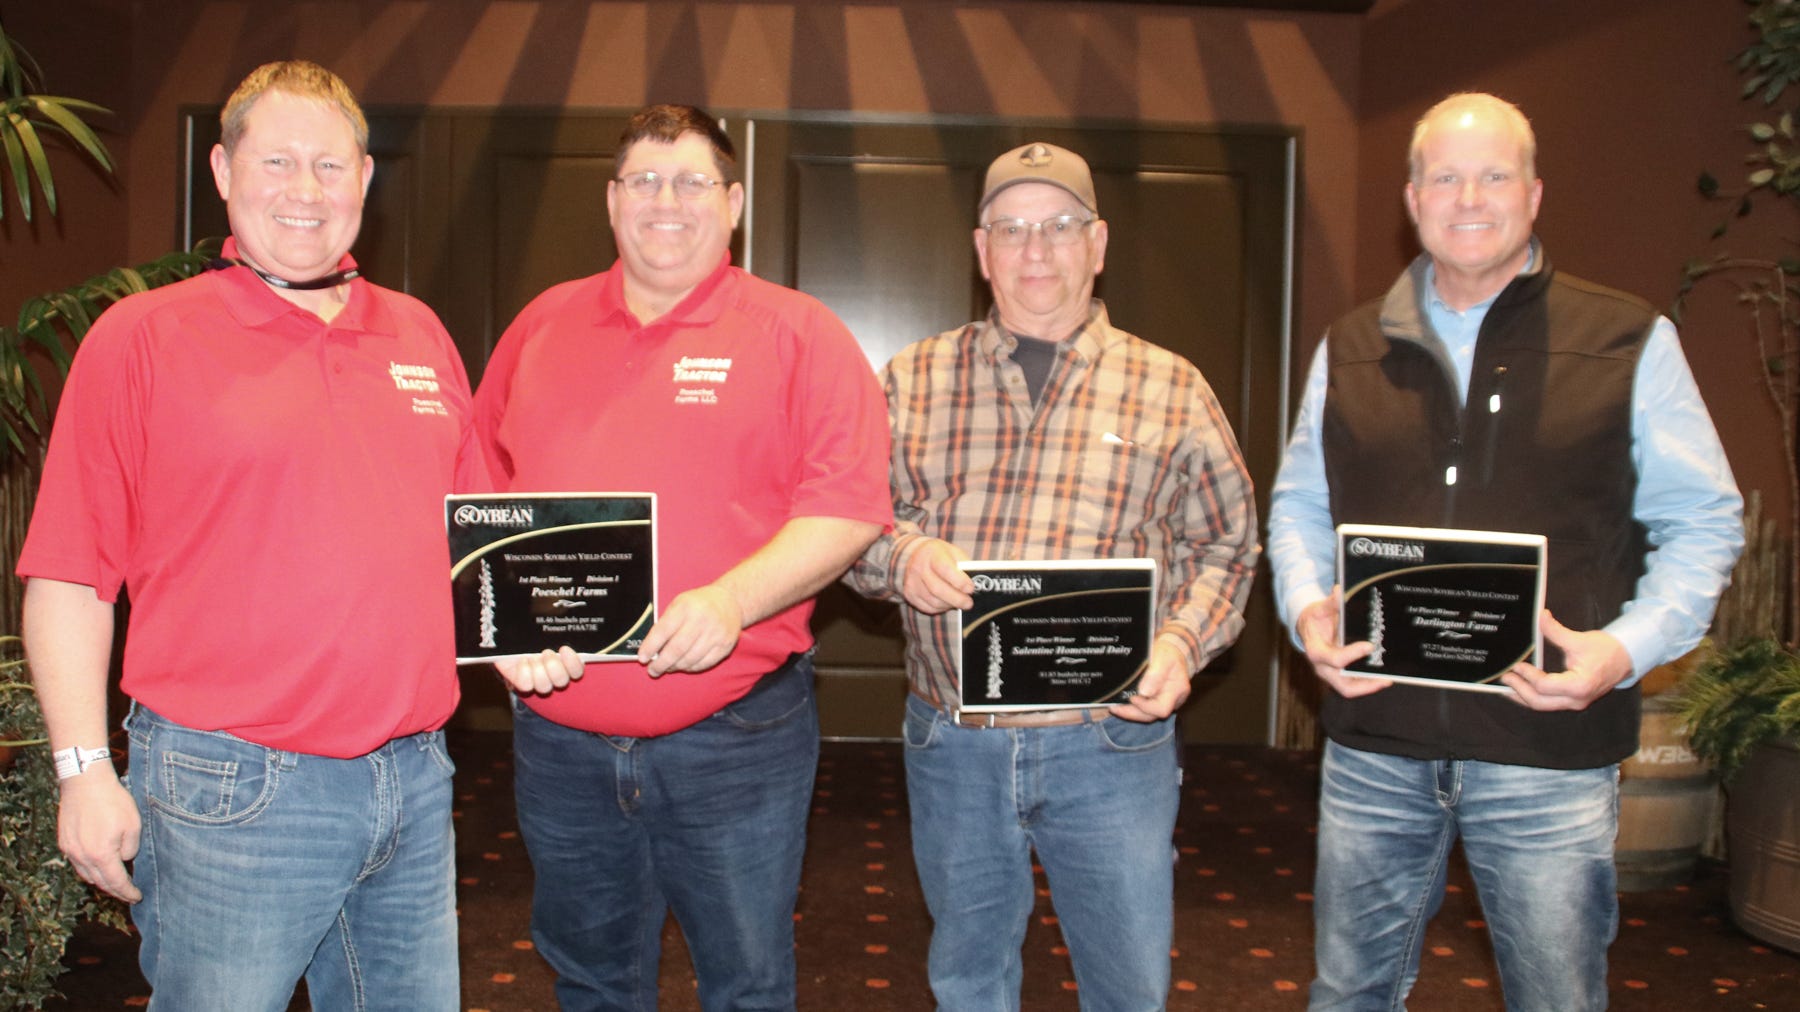 Todd and T.J. Poeschel, Jim Salentine, and Tom Evanstad holding plaques